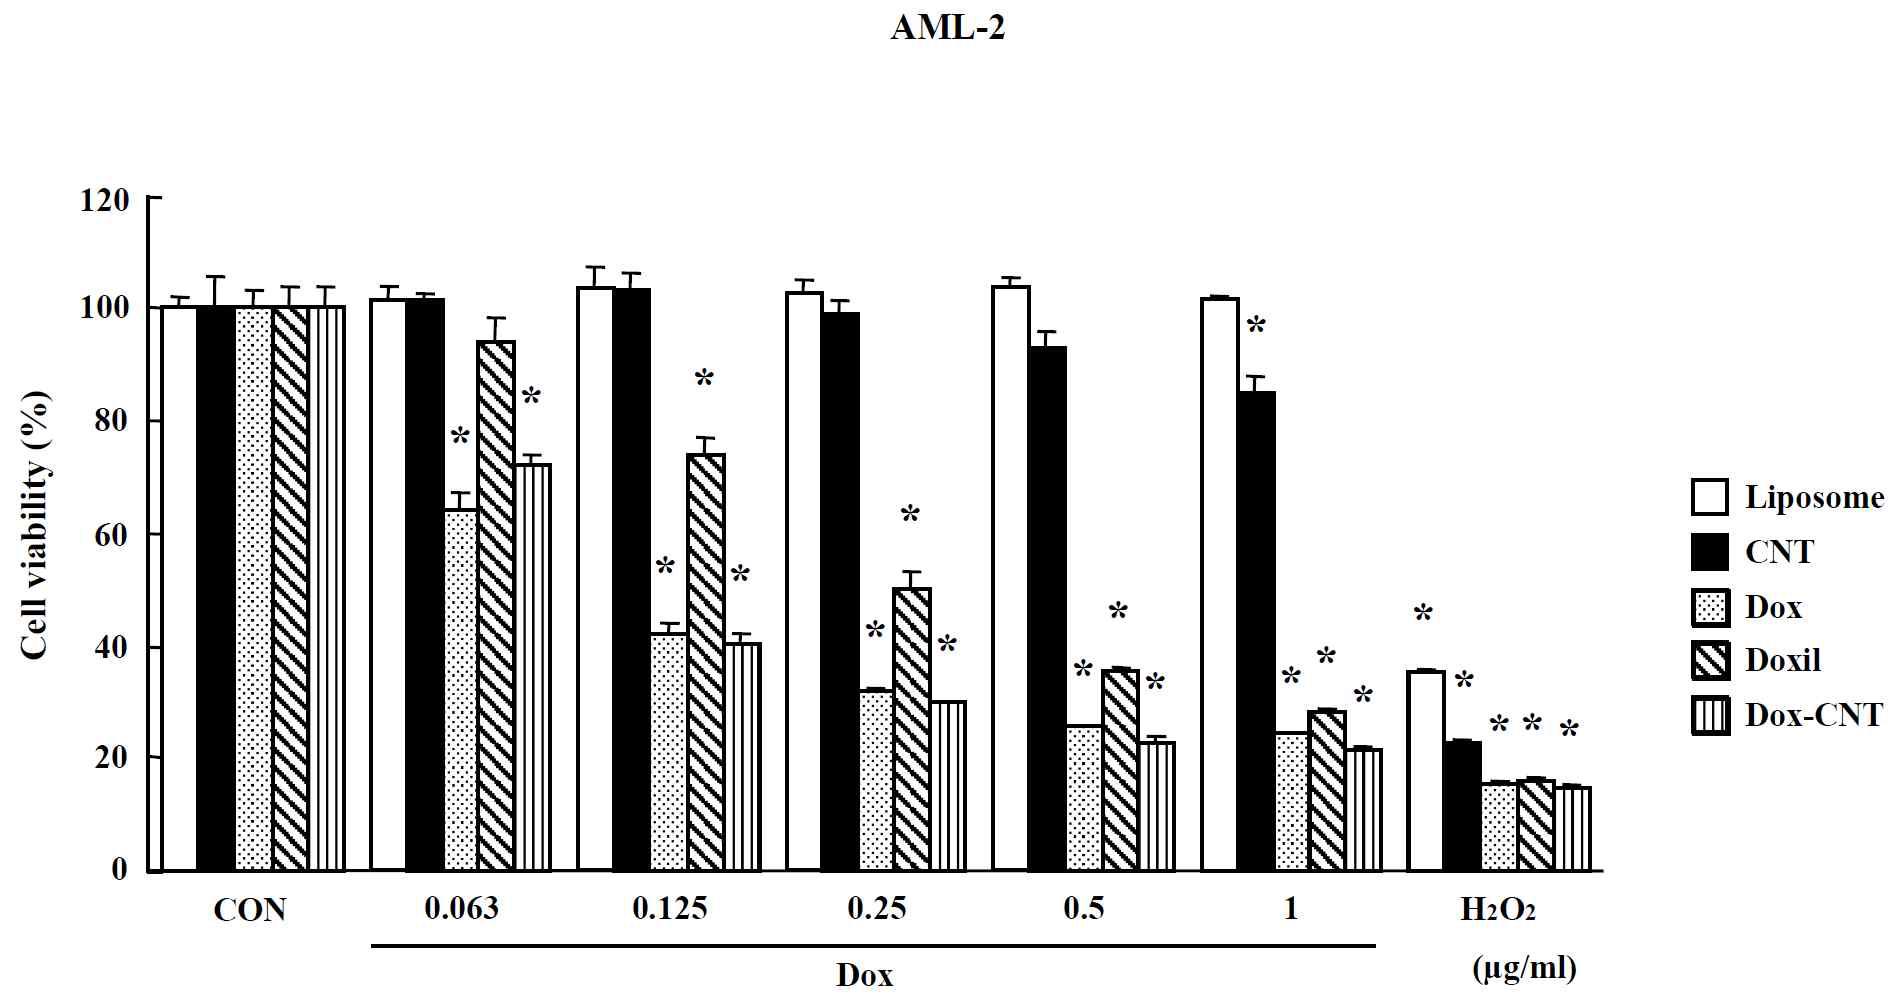 Effects of nano-anticancer drugs on MTT assay in AML-2 cells. Cells were treated with drugs for 24 hr. Data are shown as means ± SE (n = 5). * p<0.05, significantly different from the control